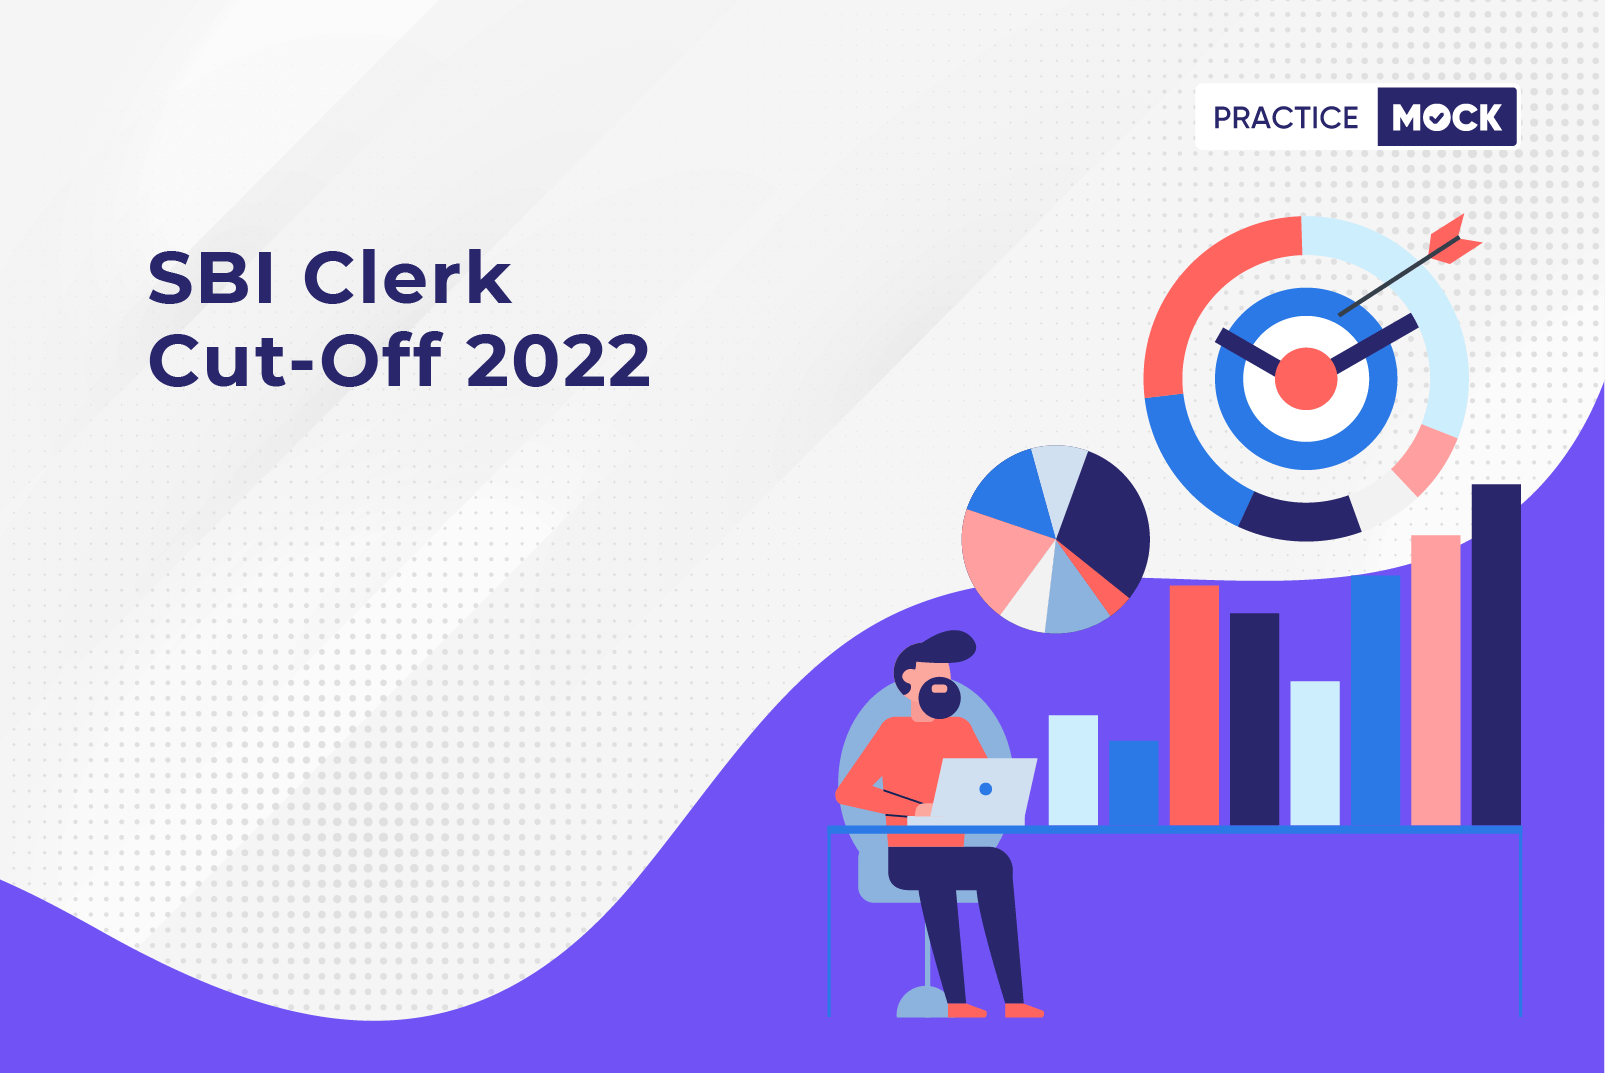 SBI Clerk Cut-Off 2022-Check Out State-wise Previous Year 2021, 2020 Cut-Off